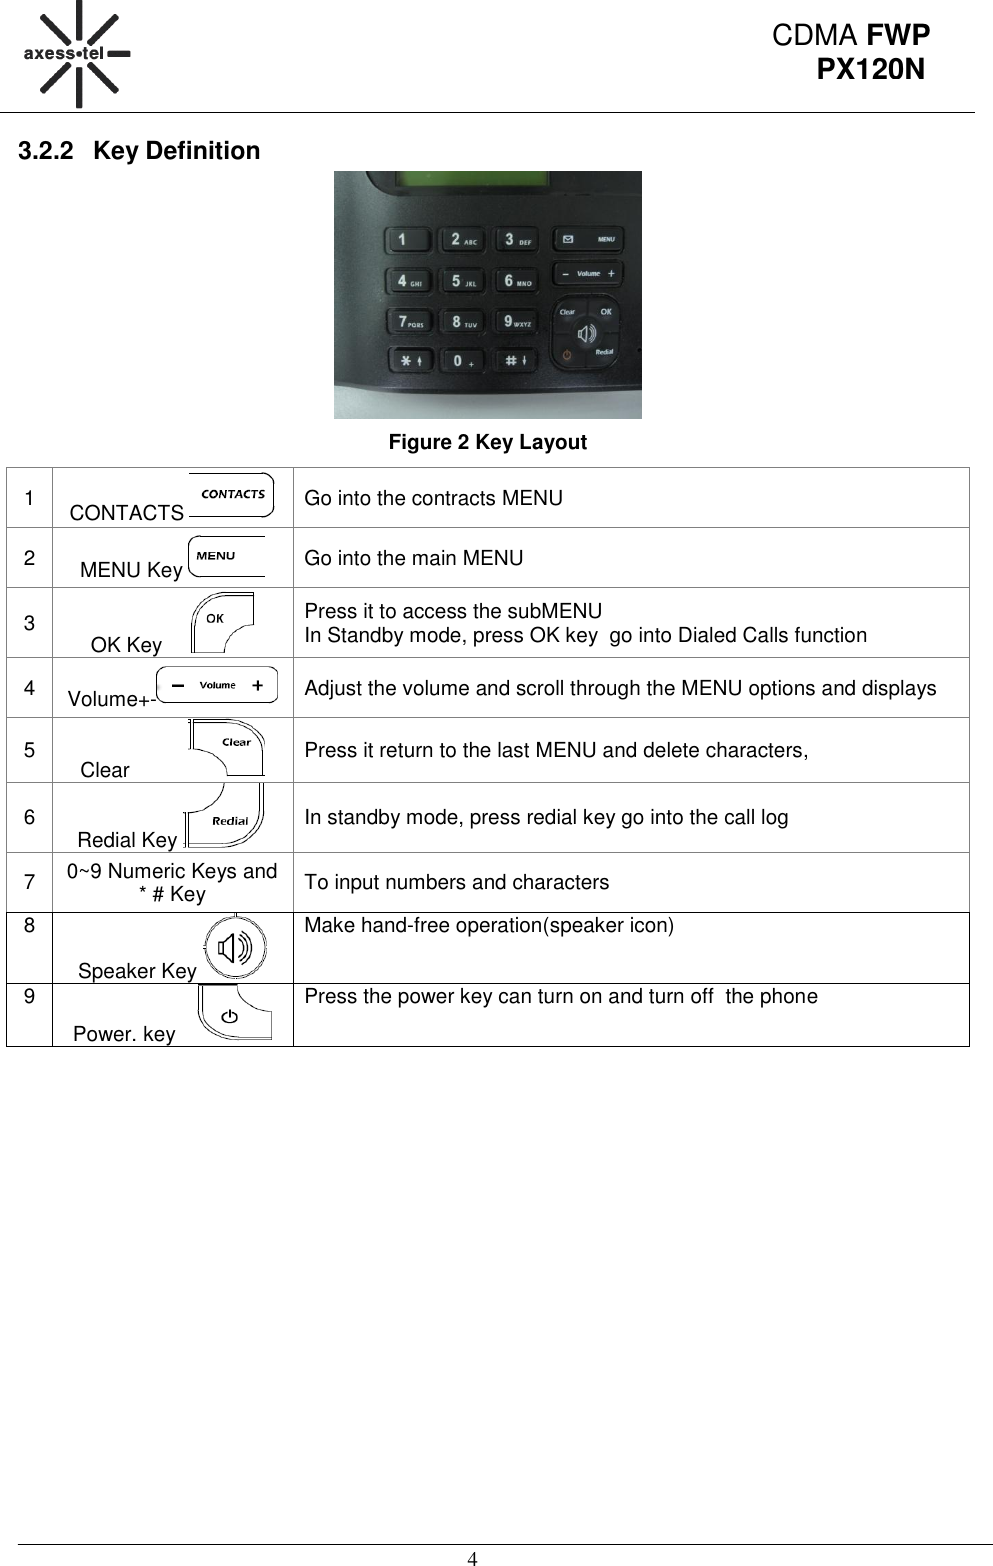                                                                                                      4 CDMA FWP PX120N 3.2.2  Key Definition  Figure 2 Key Layout 1 CONTACTS   Go into the contracts MENU 2 MENU Key   Go into the main MENU 3 OK Key      Press it to access the subMENU In Standby mode, press OK key  go into Dialed Calls function 4 Volume+-  Adjust the volume and scroll through the MENU options and displays 5 Clear            Press it return to the last MENU and delete characters, 6 Redial Key   In standby mode, press redial key go into the call log 7 0~9 Numeric Keys and * # Key To input numbers and characters 8 Speaker Key   Make hand-free operation(speaker icon) 9 Power. key    Press the power key can turn on and turn off  the phone   